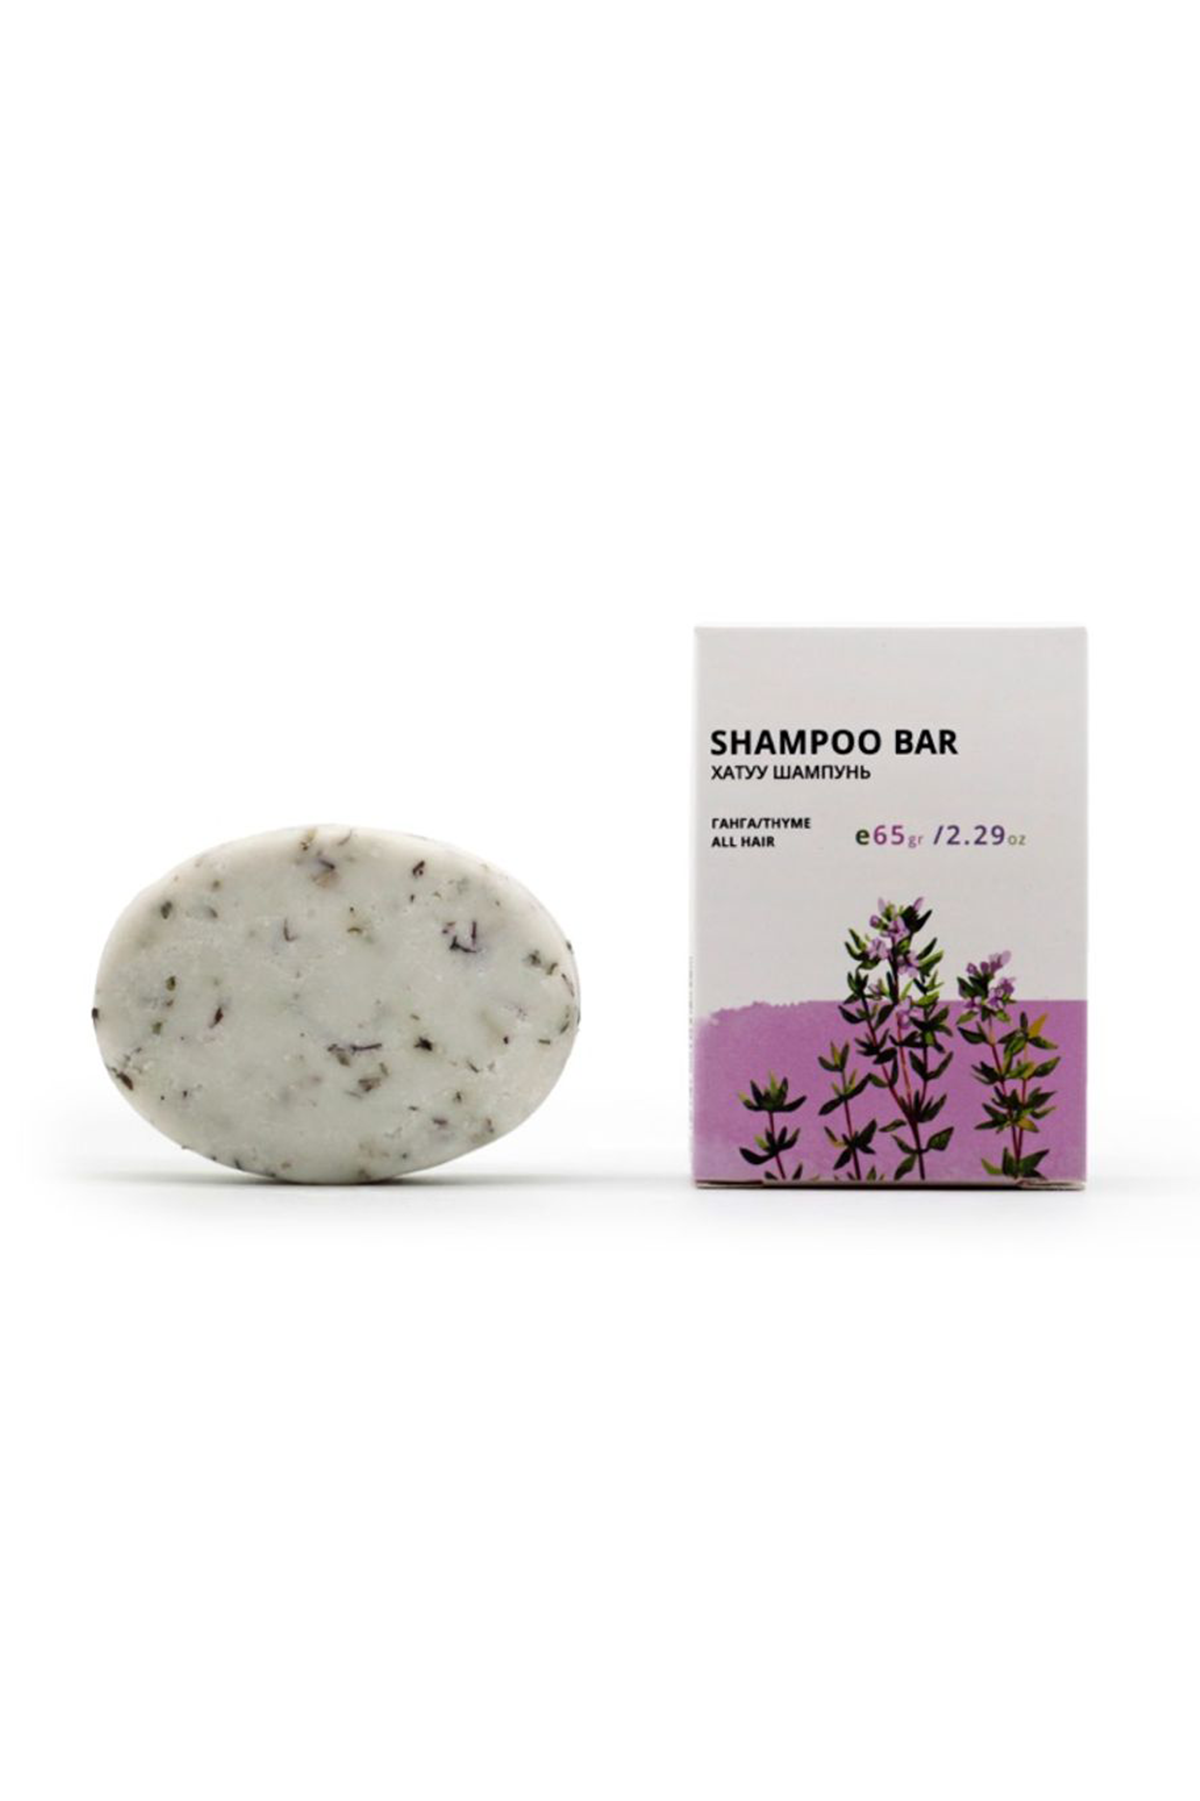 Handmade organic shampoo bar made with Thyme. Best for dry, itchy scalp